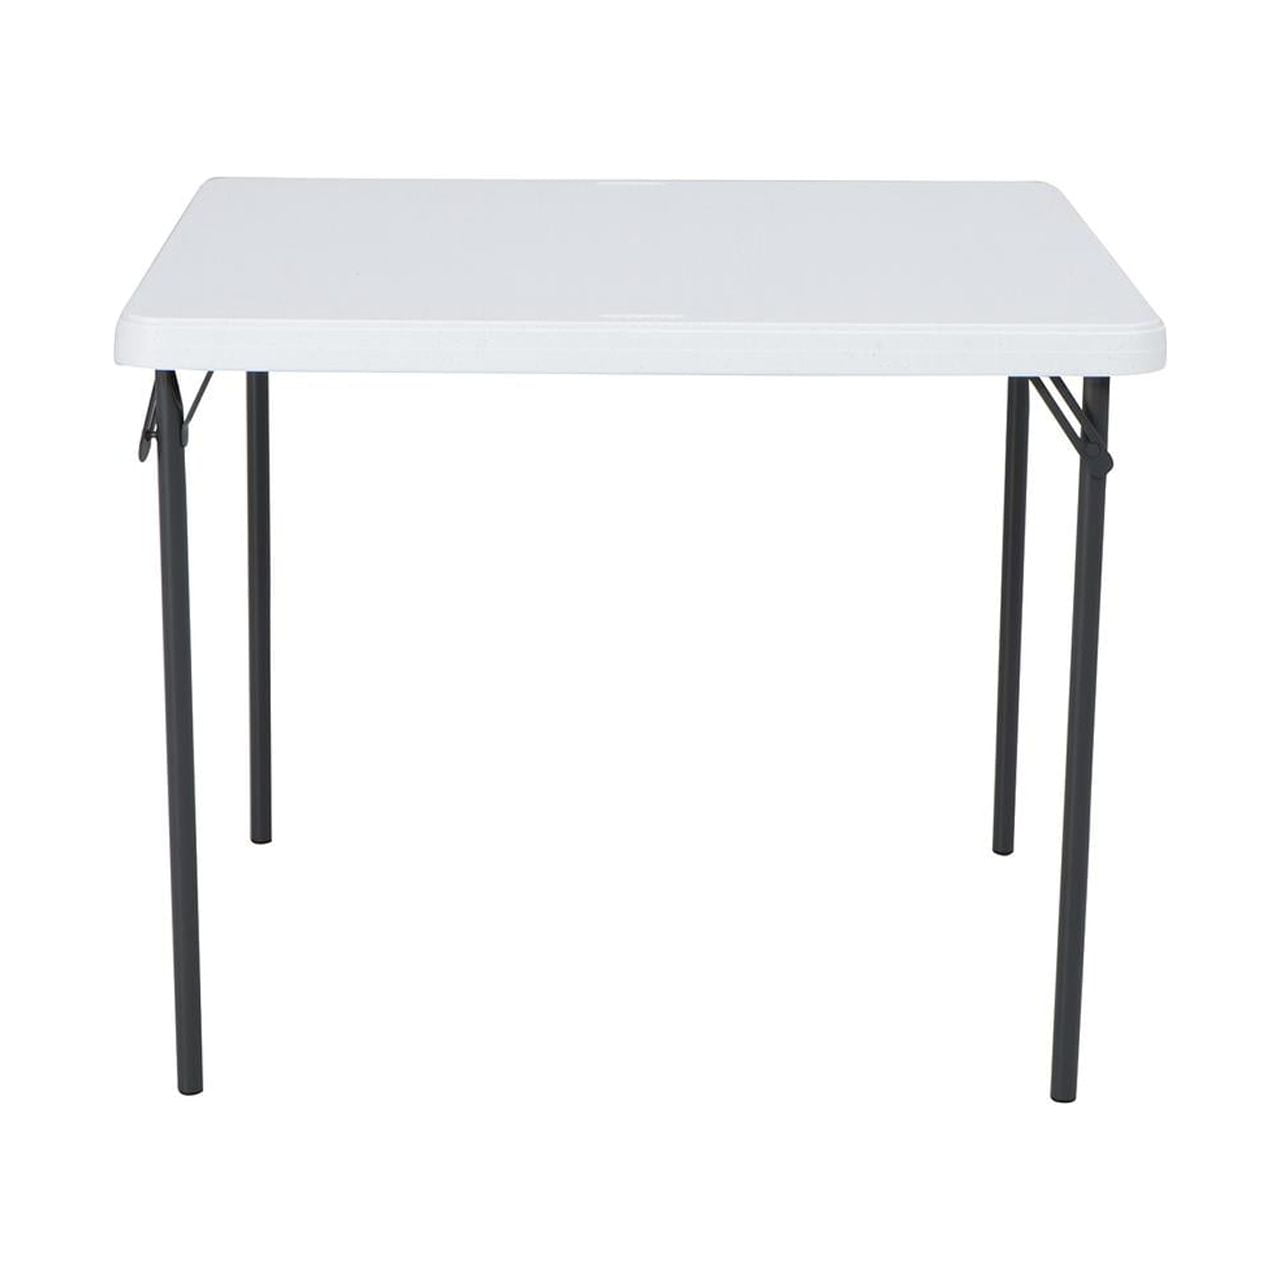 Indoor/Outdoor Grade, Commercial (80783) White Square inch 37 Table, Folding Lifetime Granite